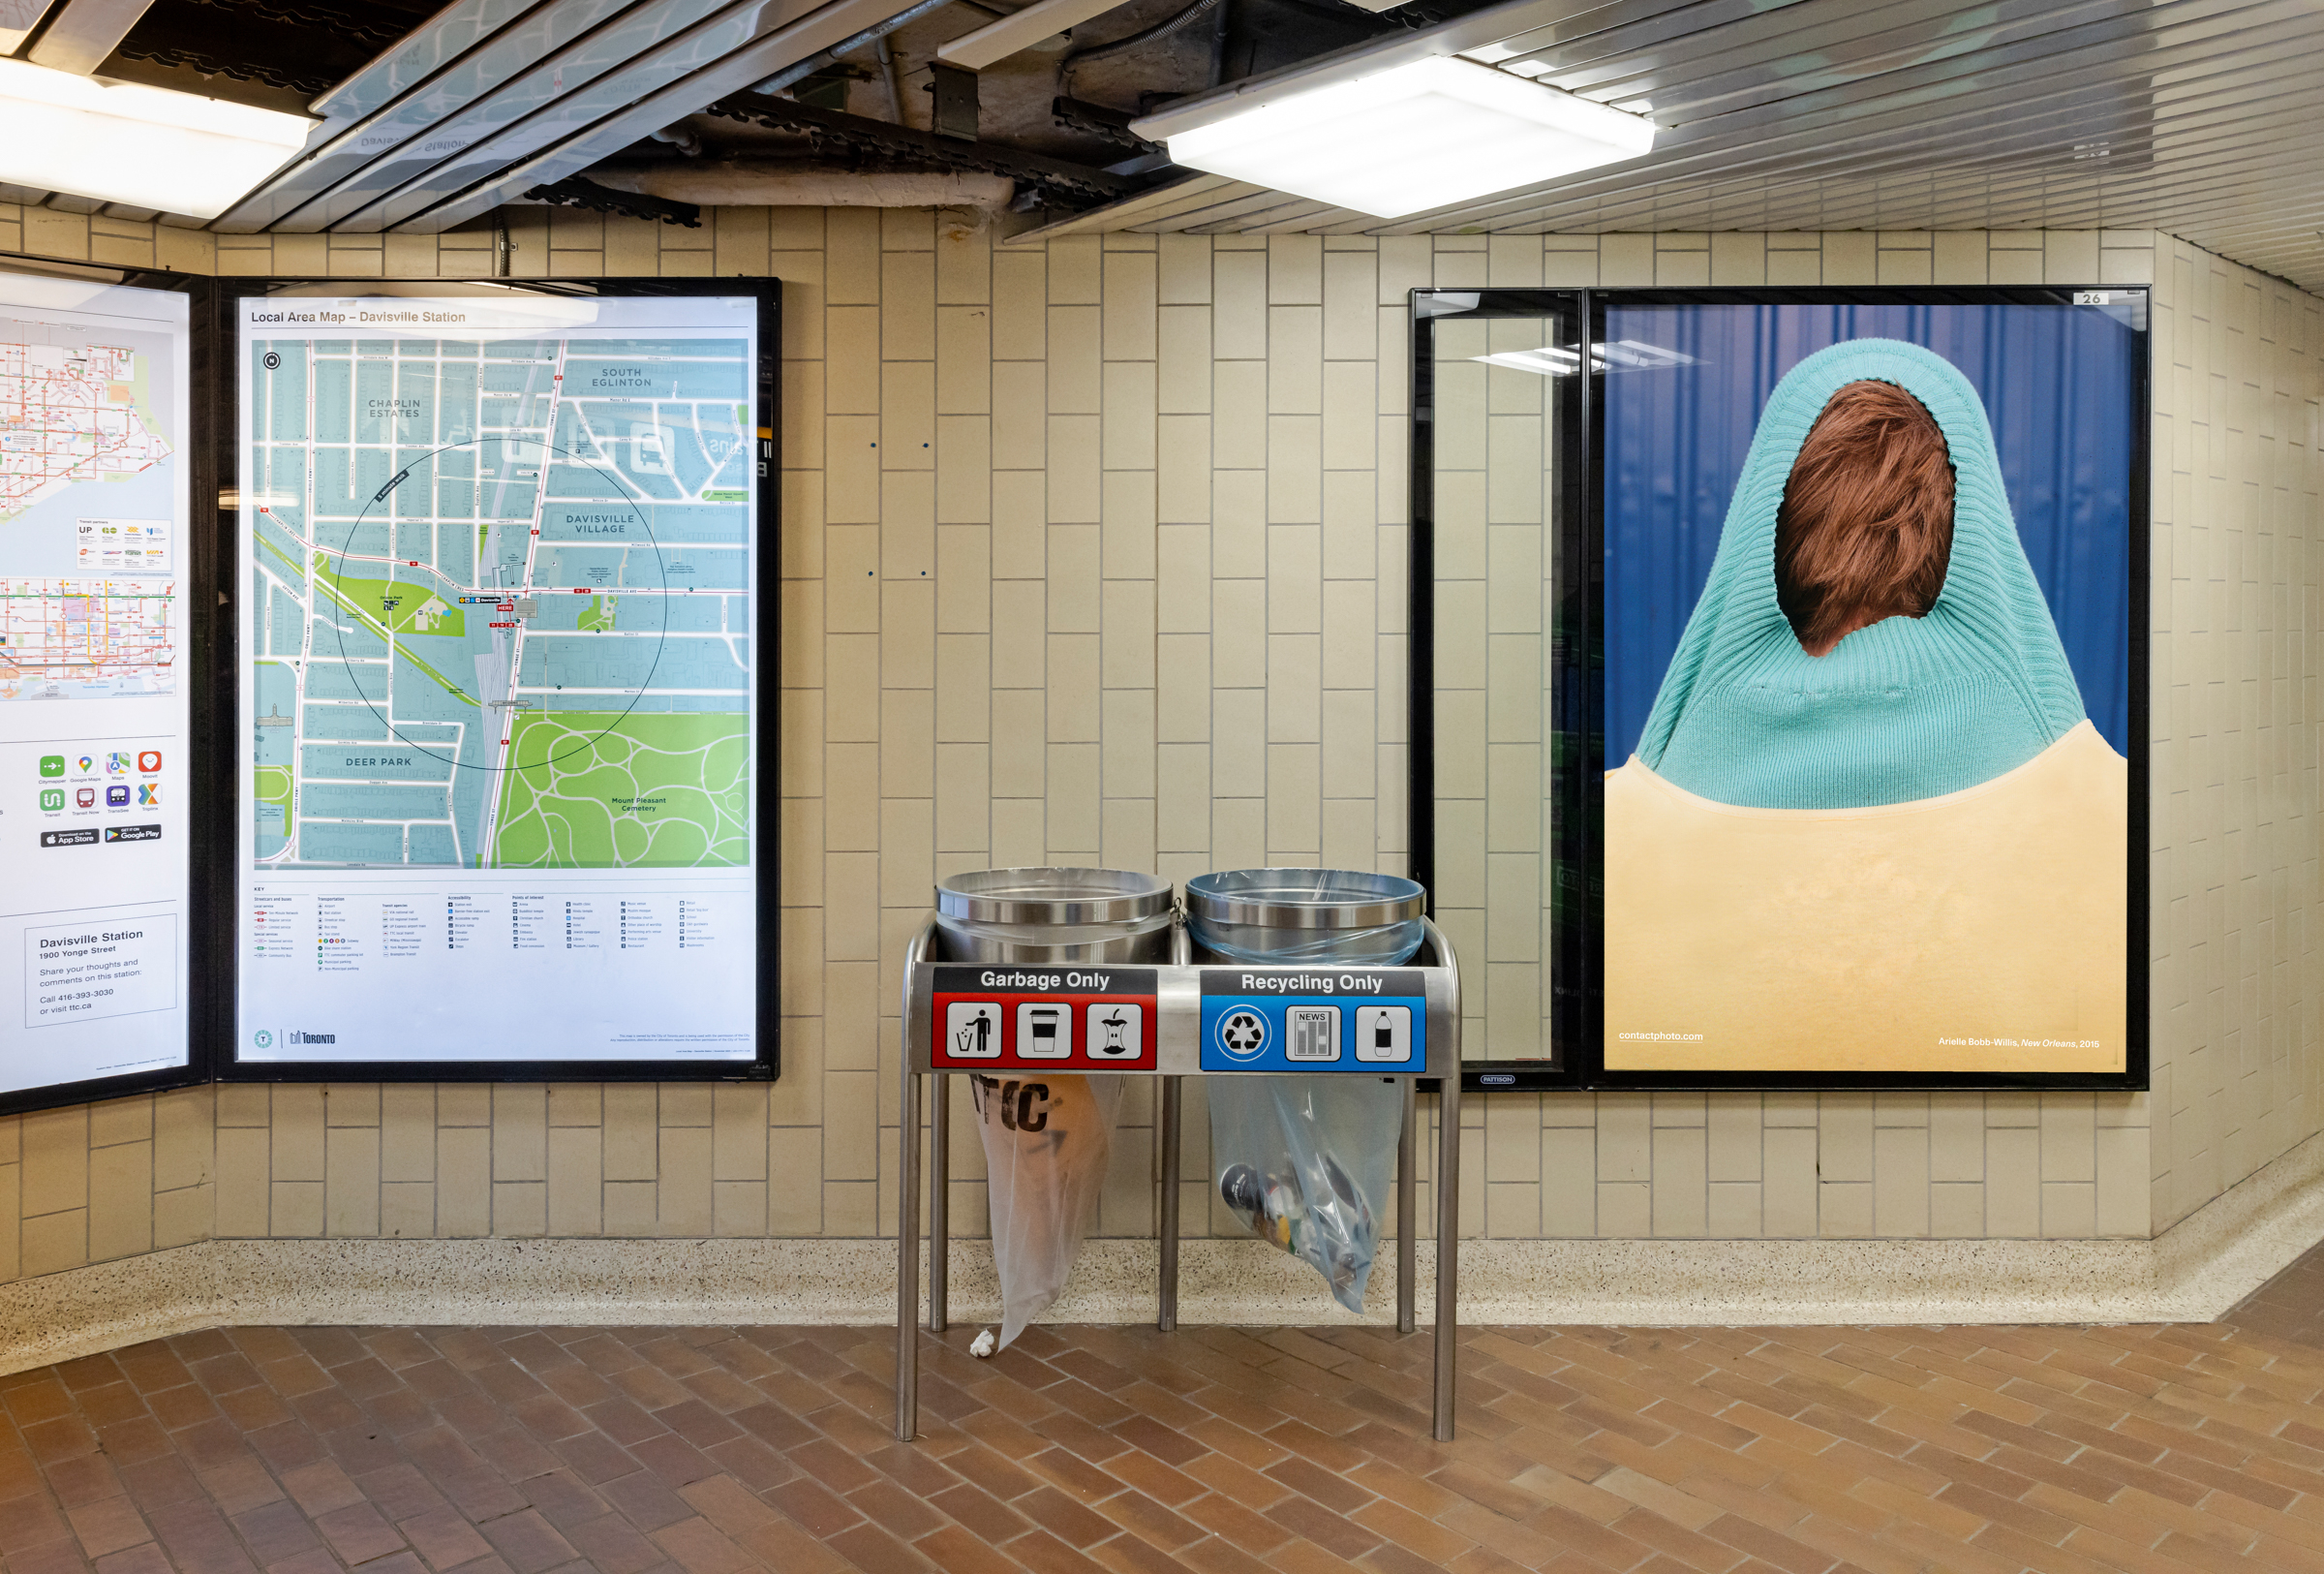     Arielle Bob-Willis, Furiously Happy, 2024, installation view, posters at Davisville Subway Station, Toronto, Courtesy of the artist and CONTACT Photography Festival. Photo: Toni Hafkenscheid

